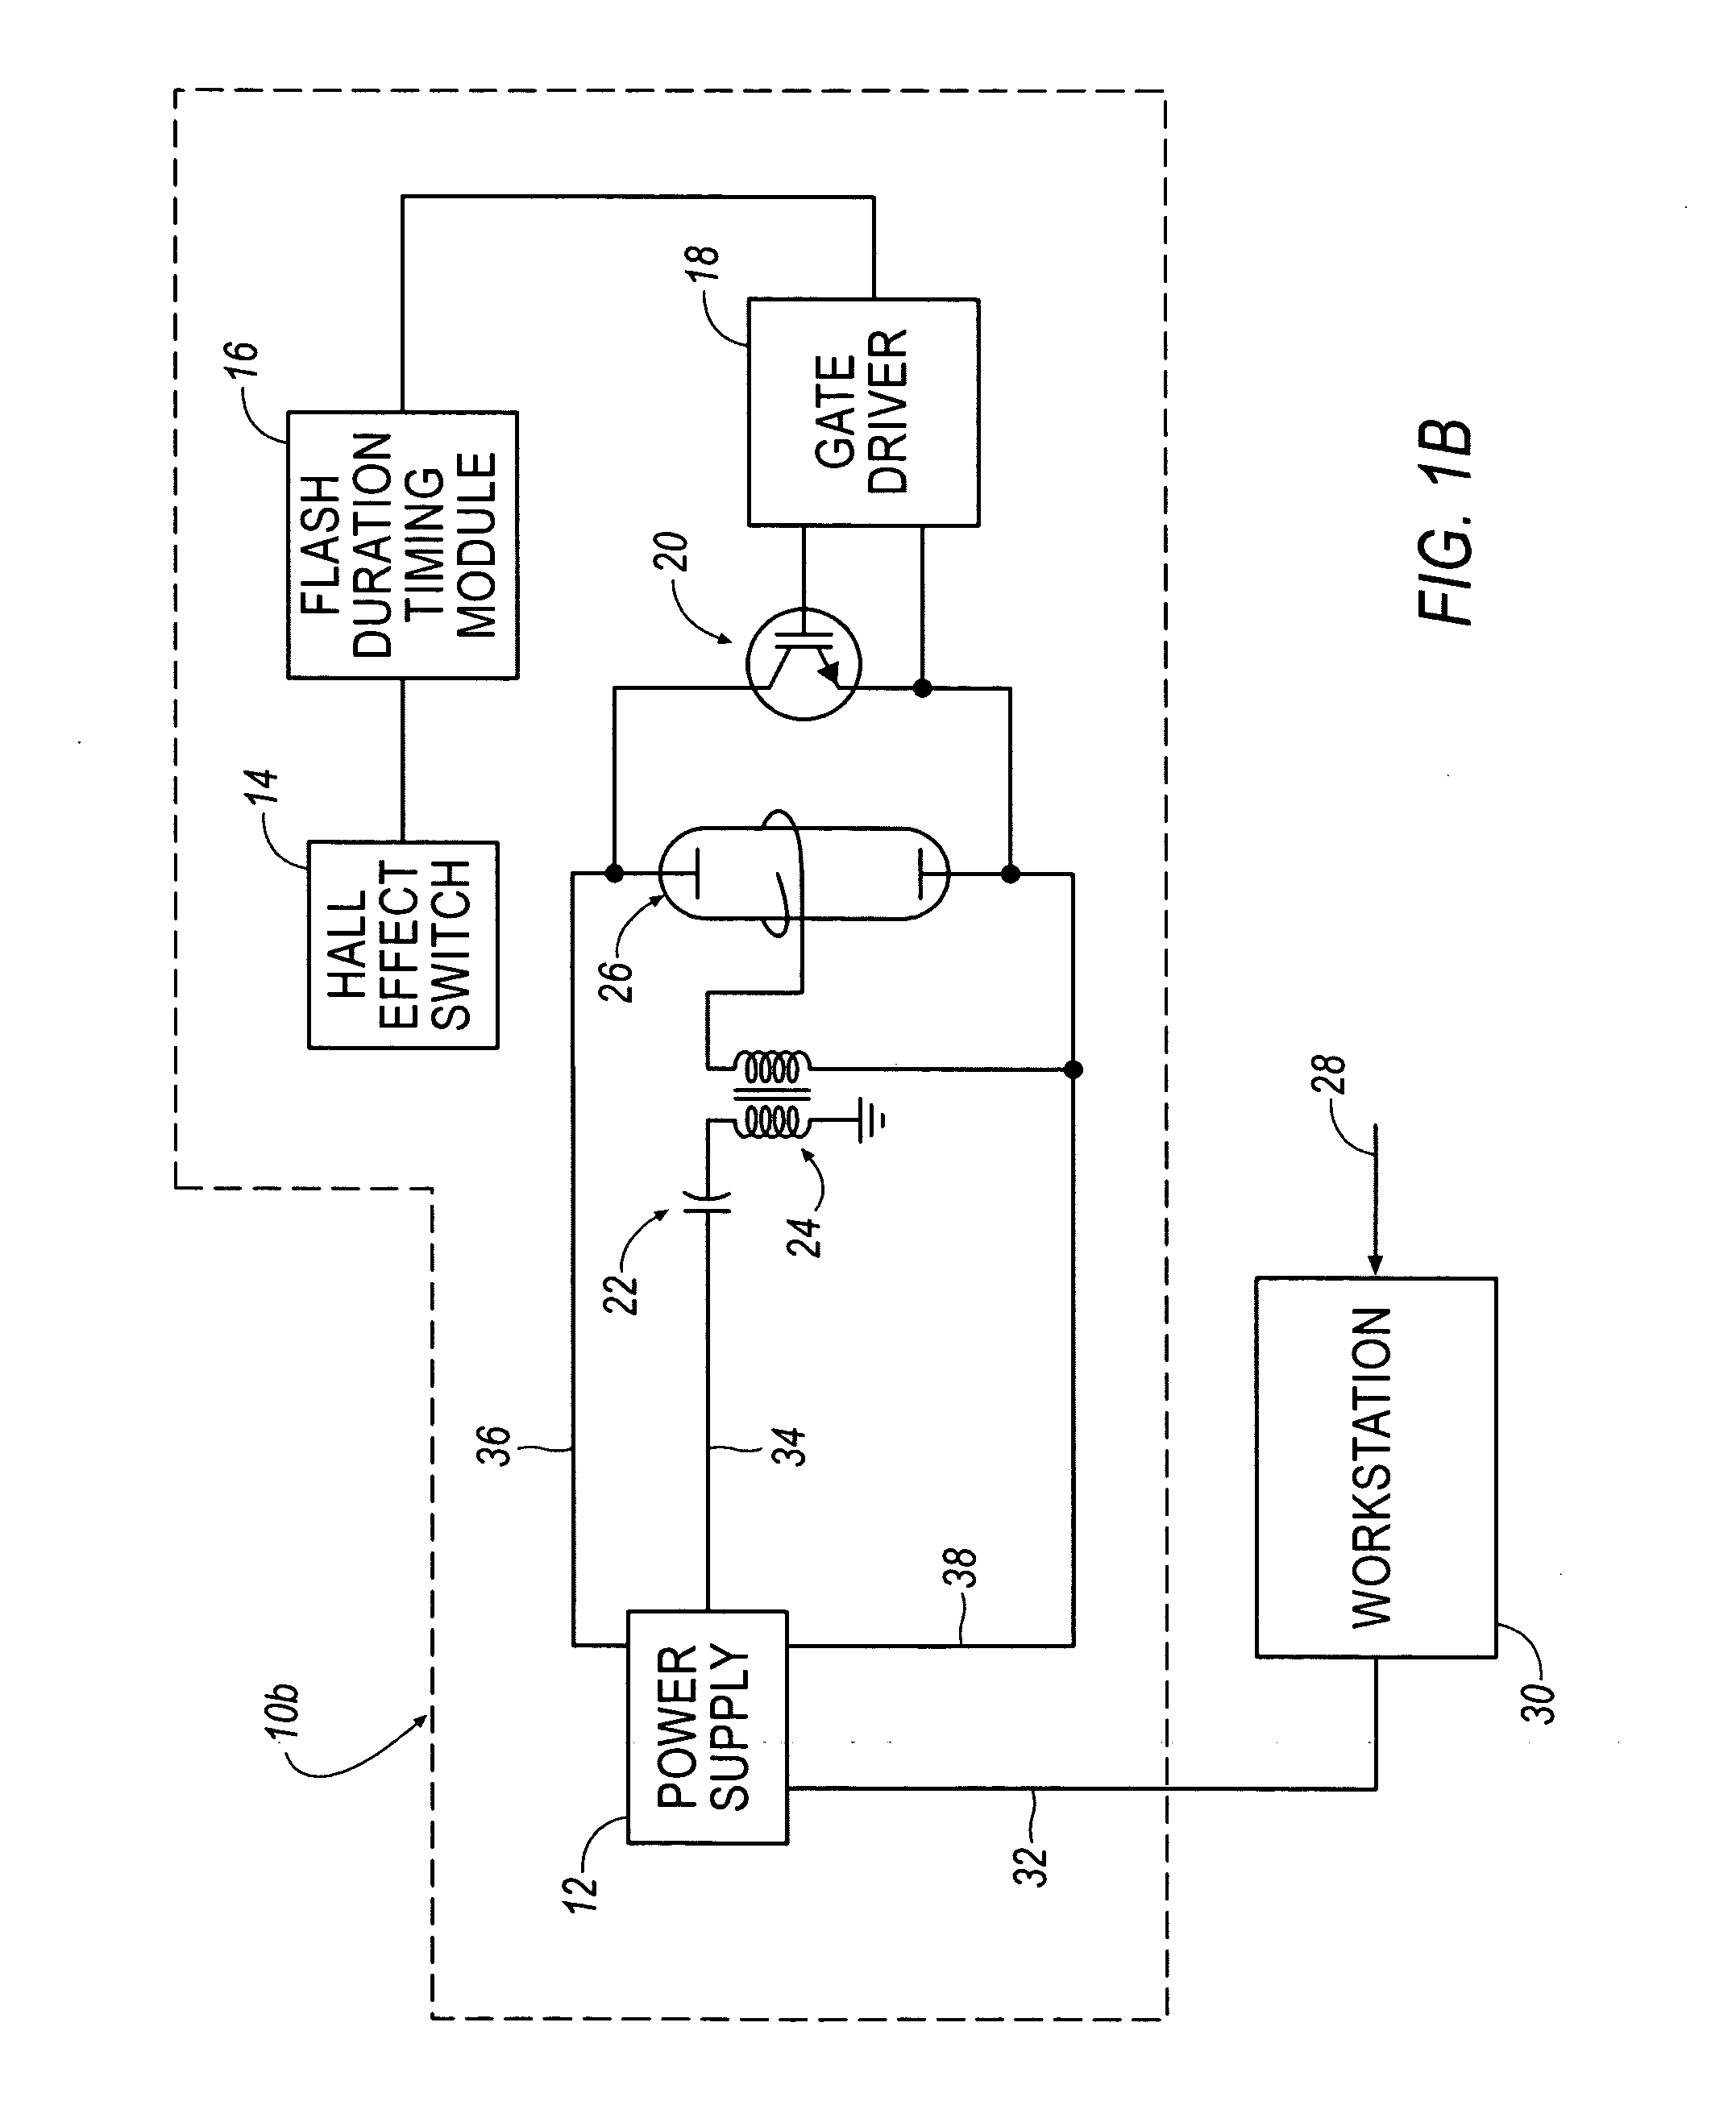 Method and apparatus for thermographic imaging using flash pulse truncation